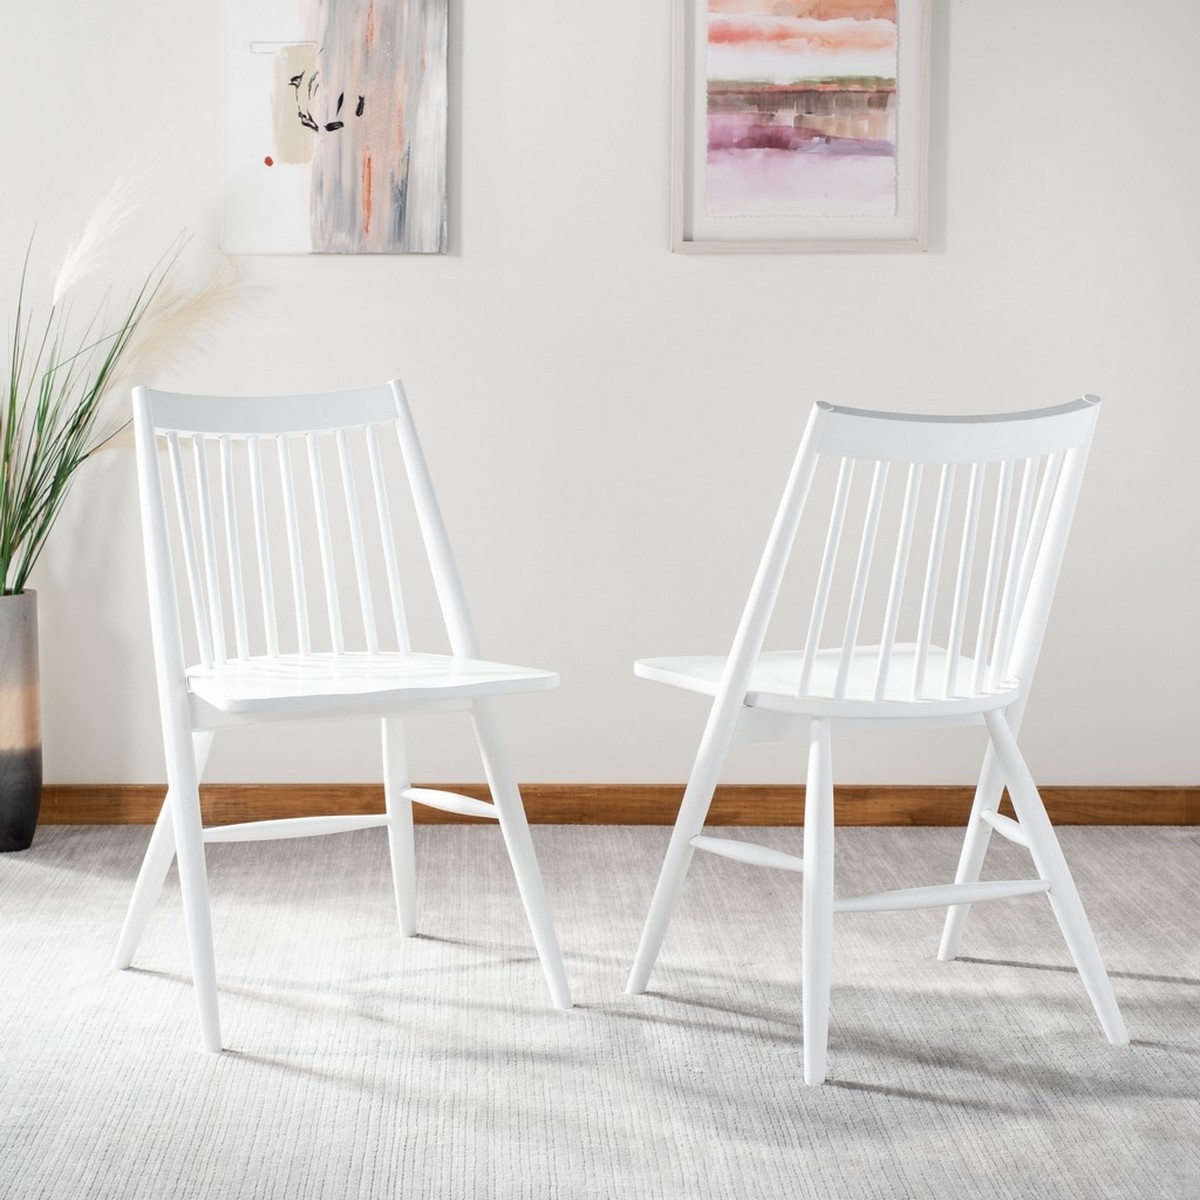 Wren 19" Spindle Dining Chair, White, Set of 2 - Image 5